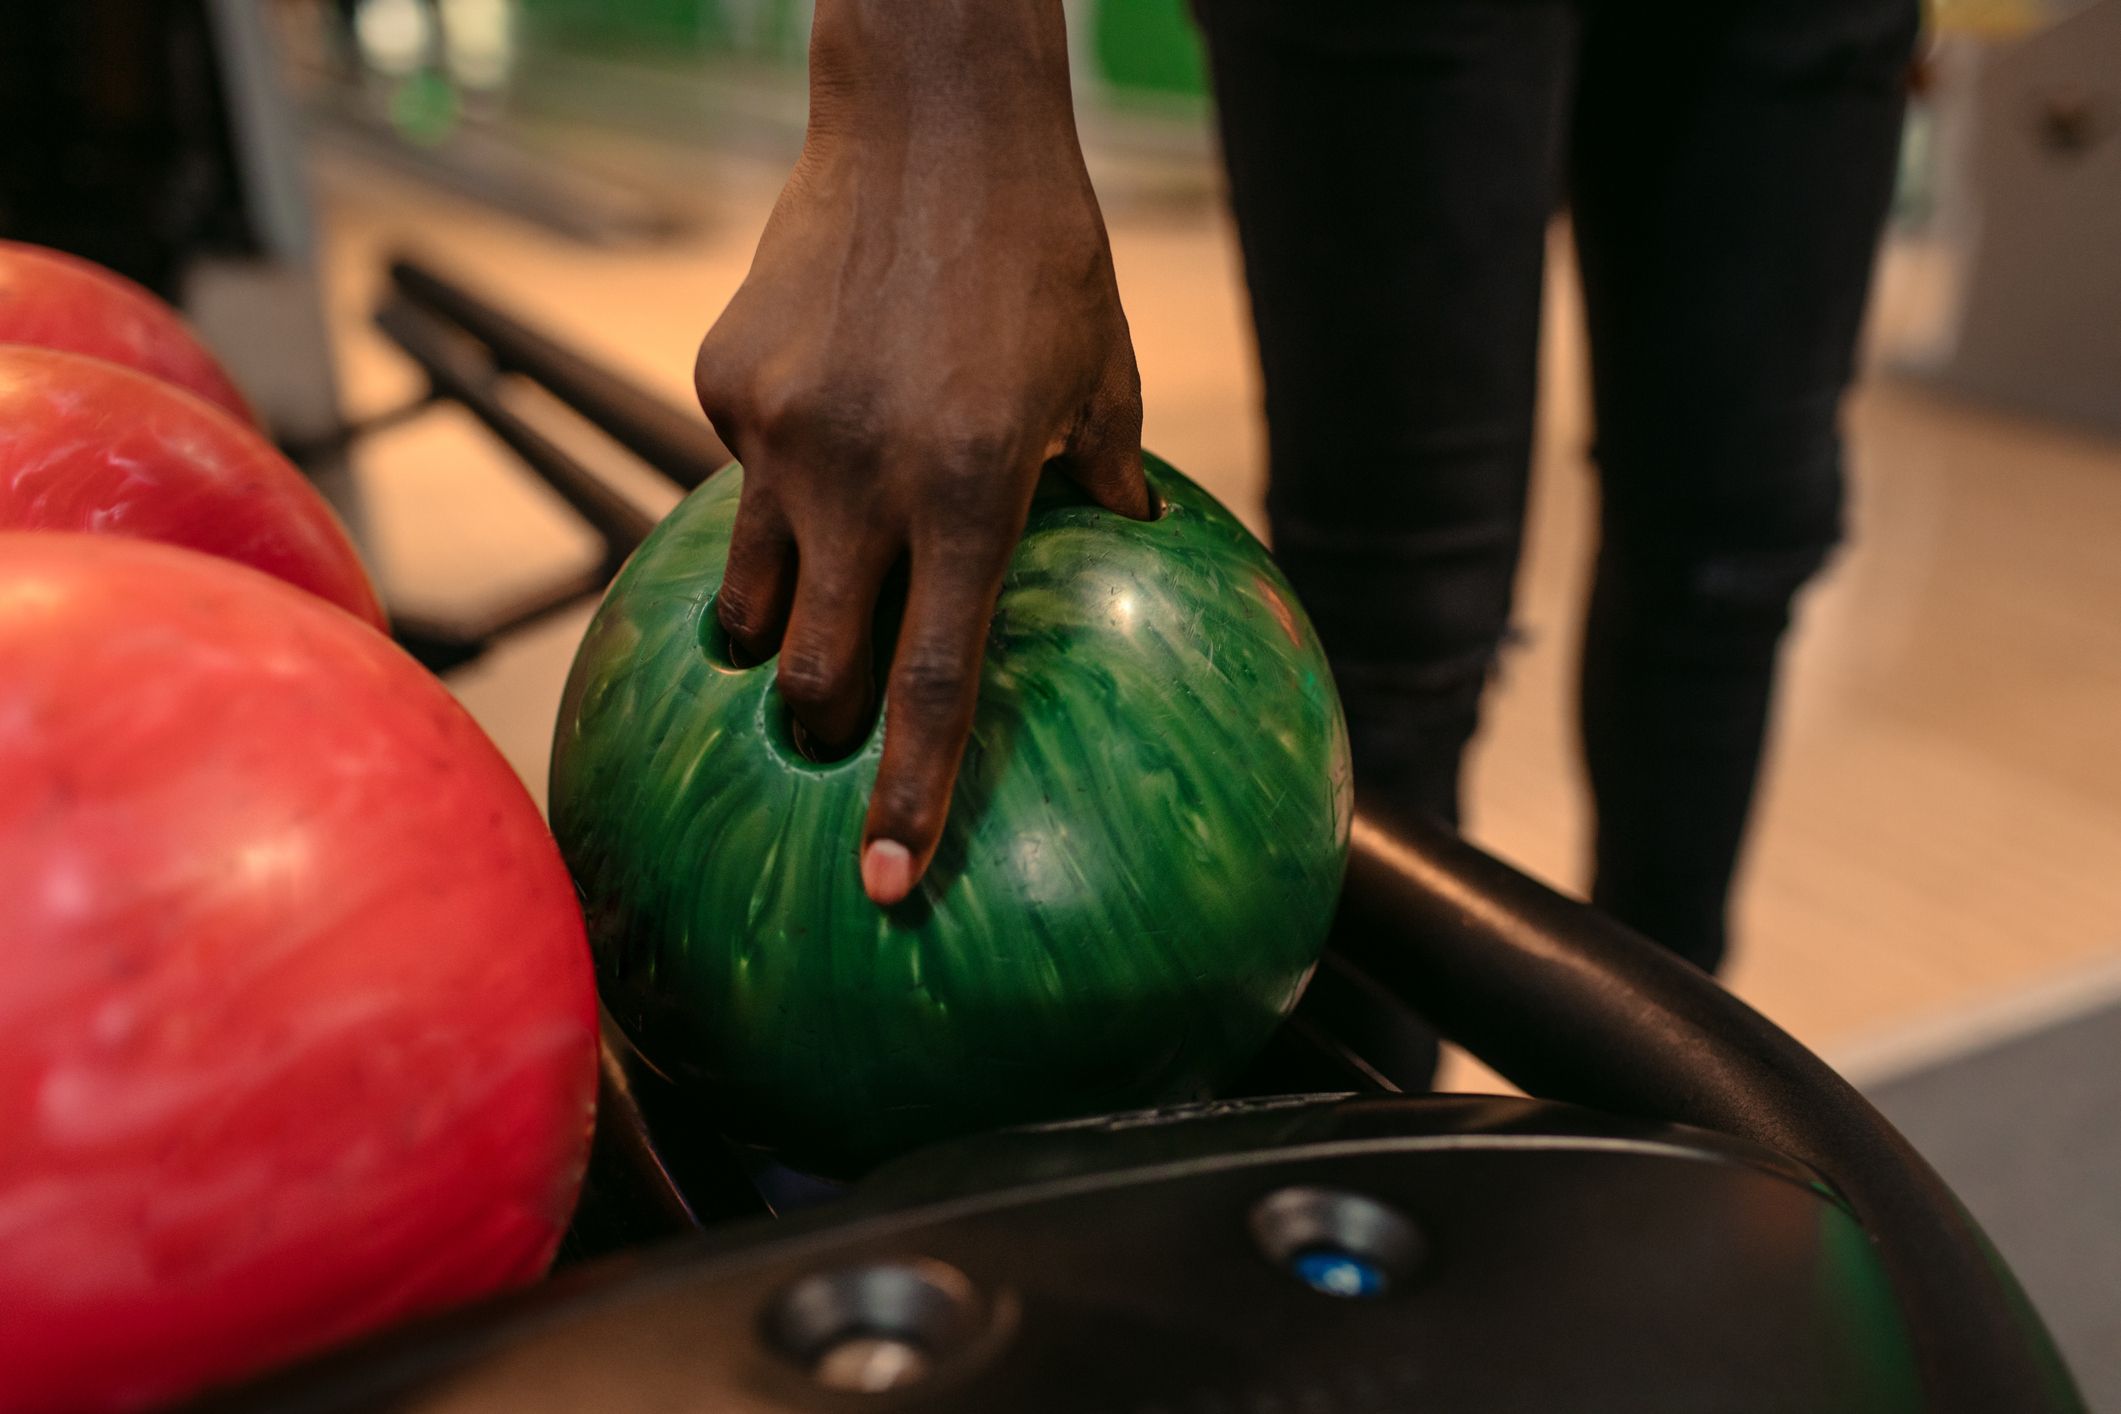 Some Bowling Balls Float While Others Dont—You Can Thank Density